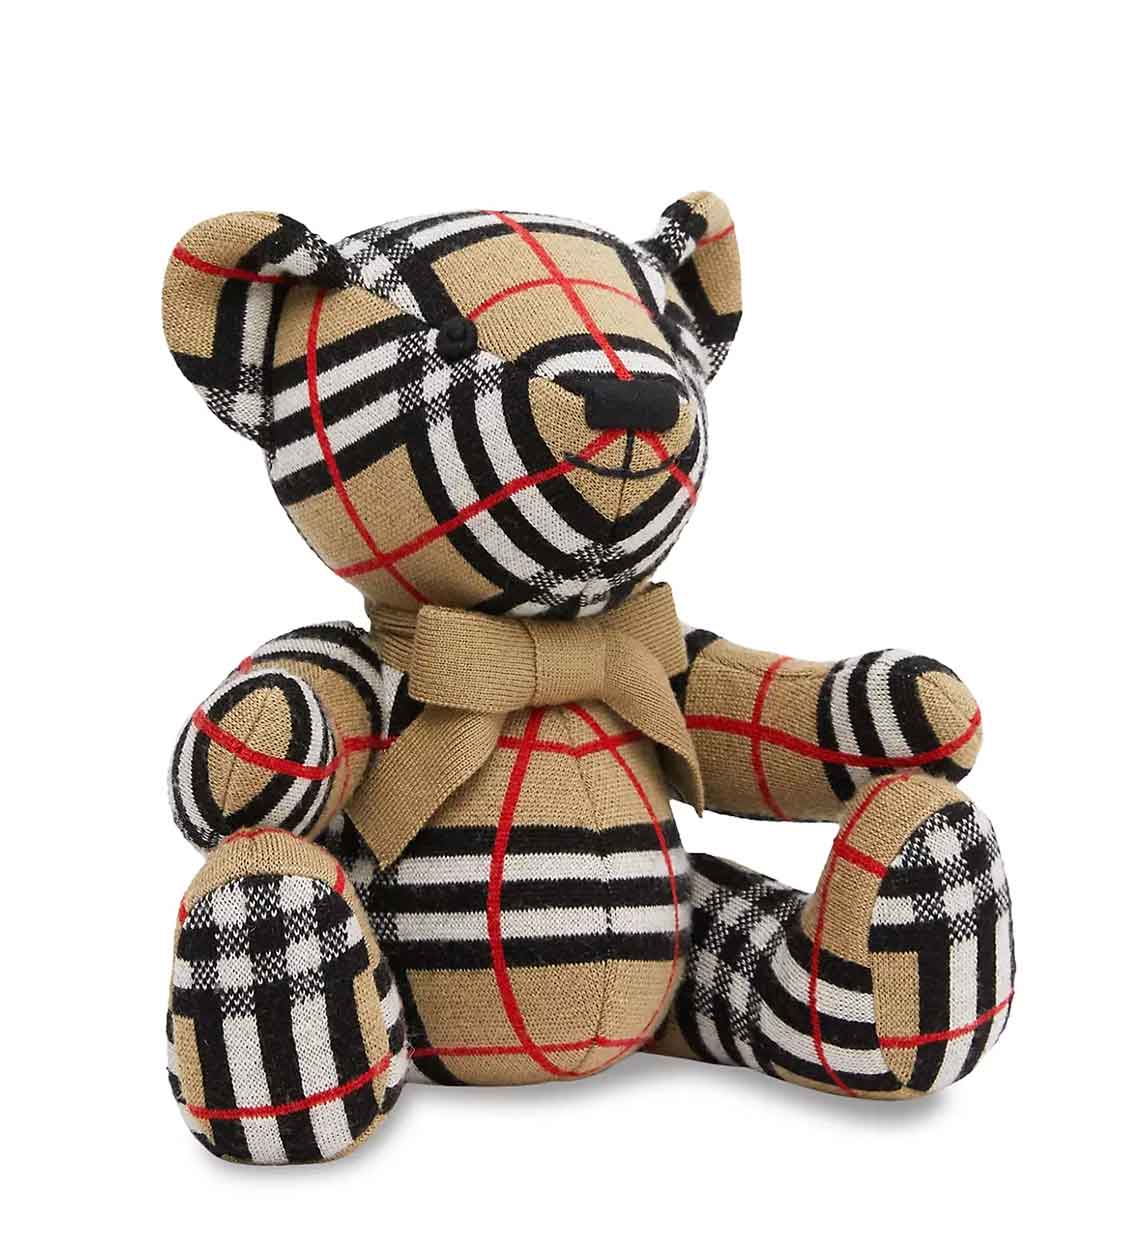 20+ Luxury Baby Gifts to Choose From For the Preppy Newborn to 2 Years Old